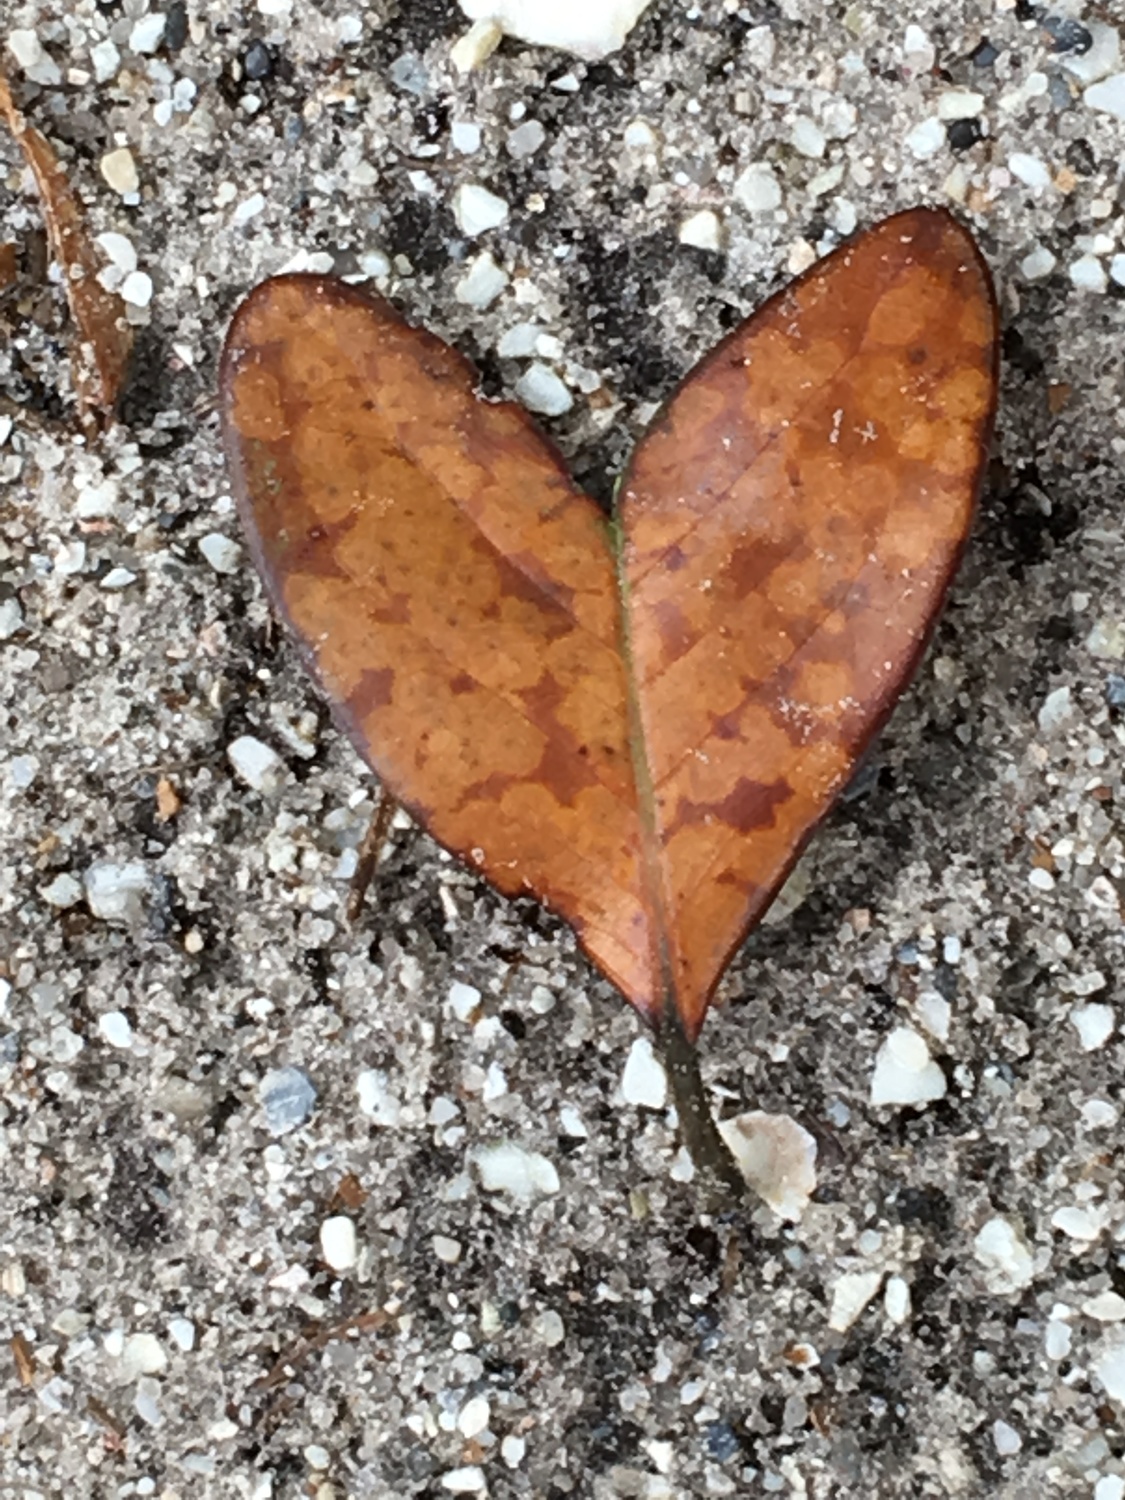 Gallery Photo of Even the leaves know, "all we need is love".